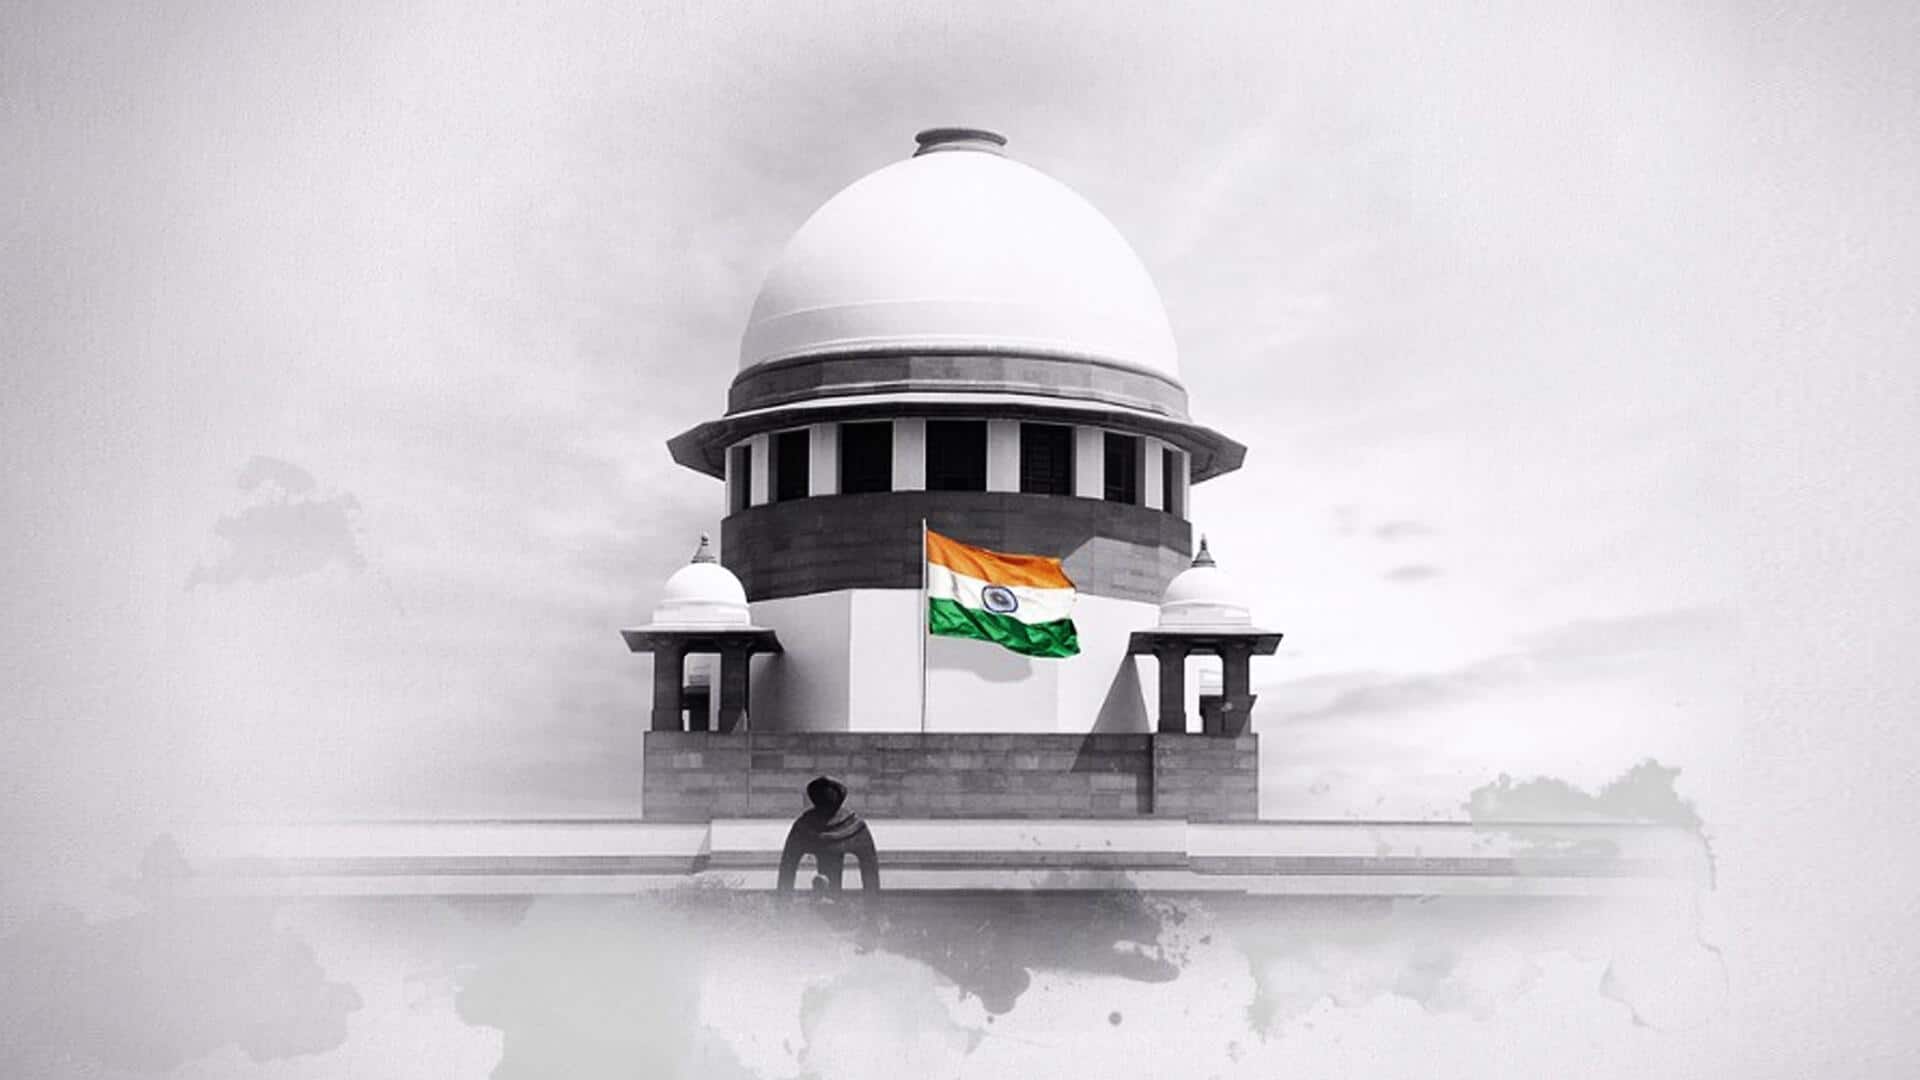 'Let there not be contest...': SC on Centre-states fund row